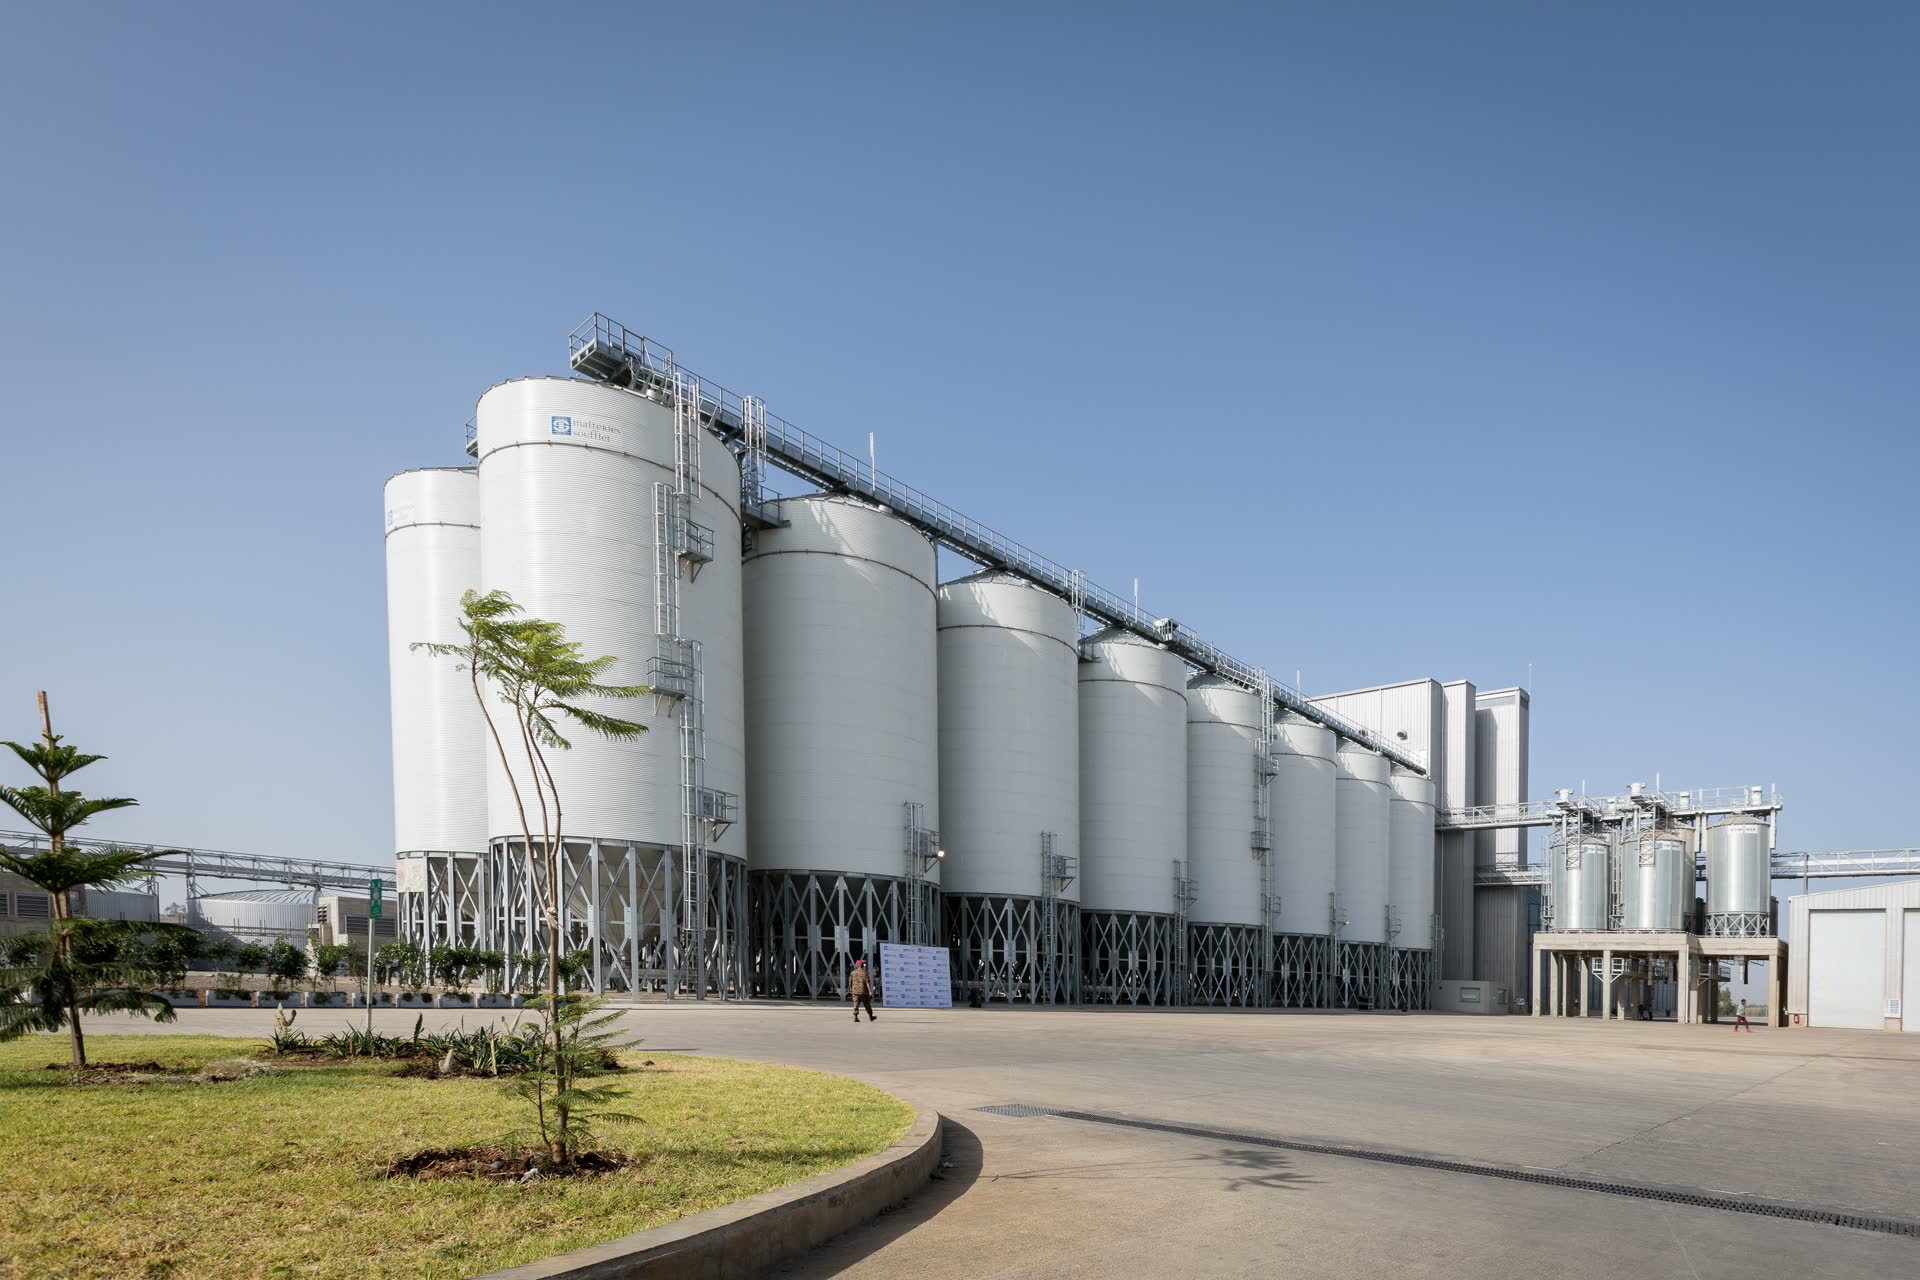 Malteries Soufflet Ethiopia, a production site that runs on green energy